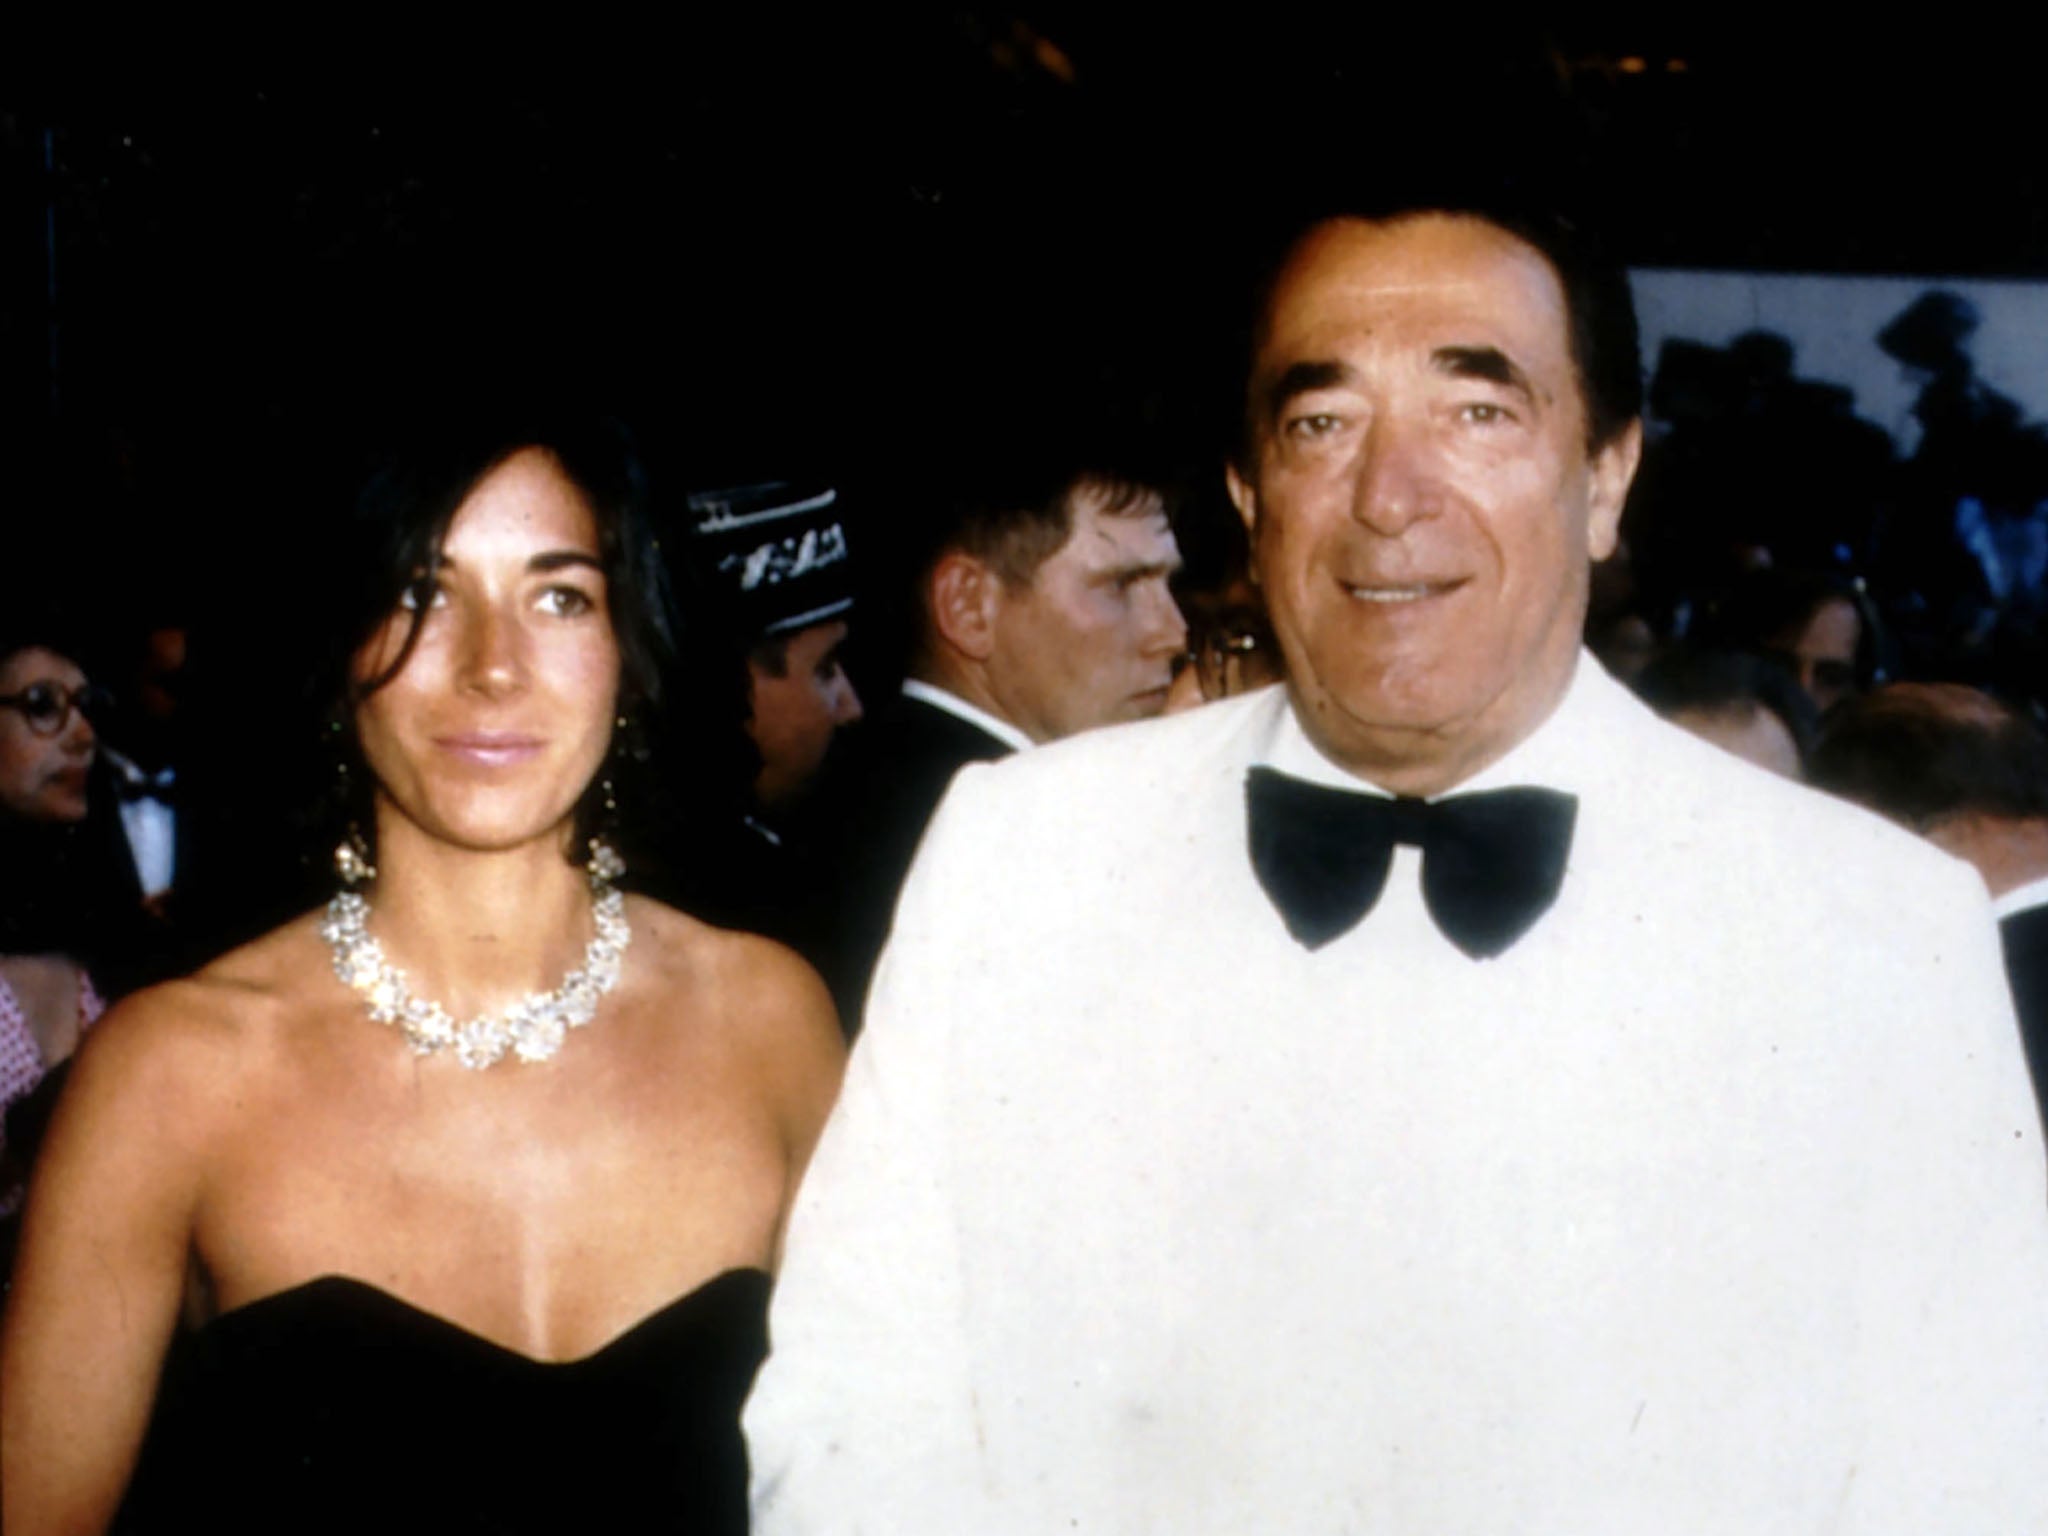 Robert Maxwell and his daughter Ghislaine in 1990